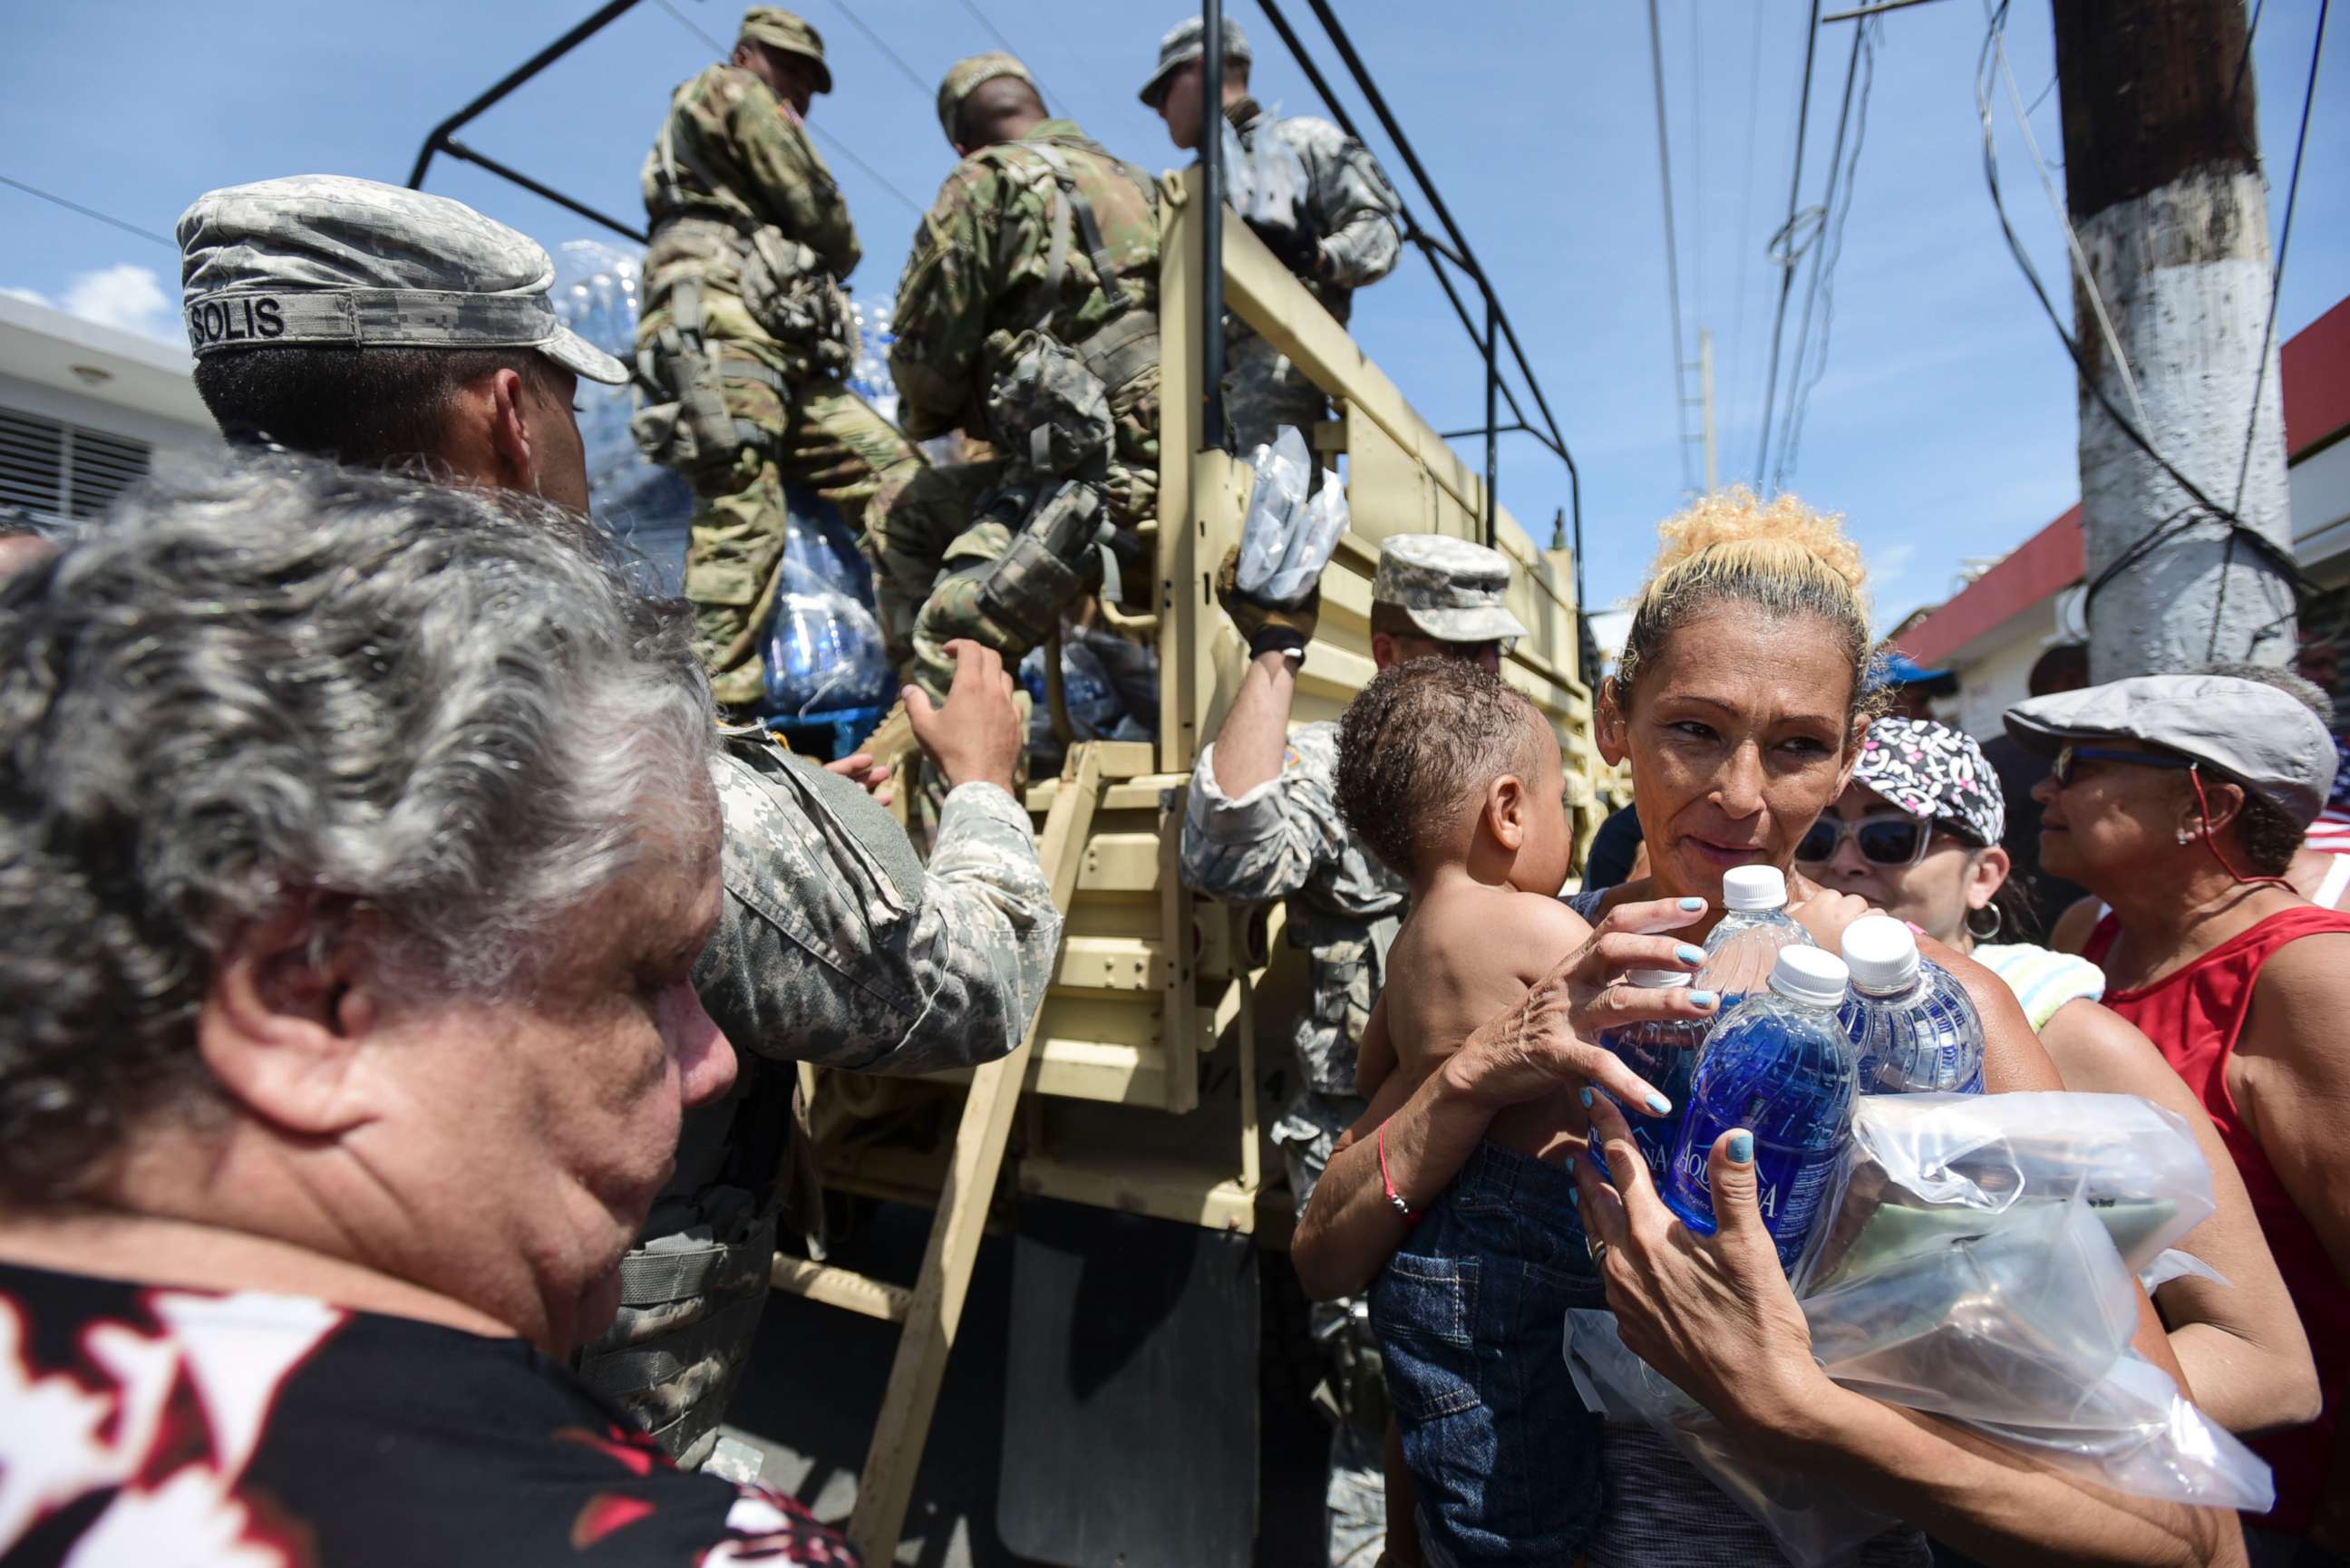 PHOTO: National Guard Soldiers arrive at Barrio Obrero in Santurce to distribute water and food among those affected by the passage of Hurricane Maria, in San Juan, Puerto Rico, Sept. 24, 2017.